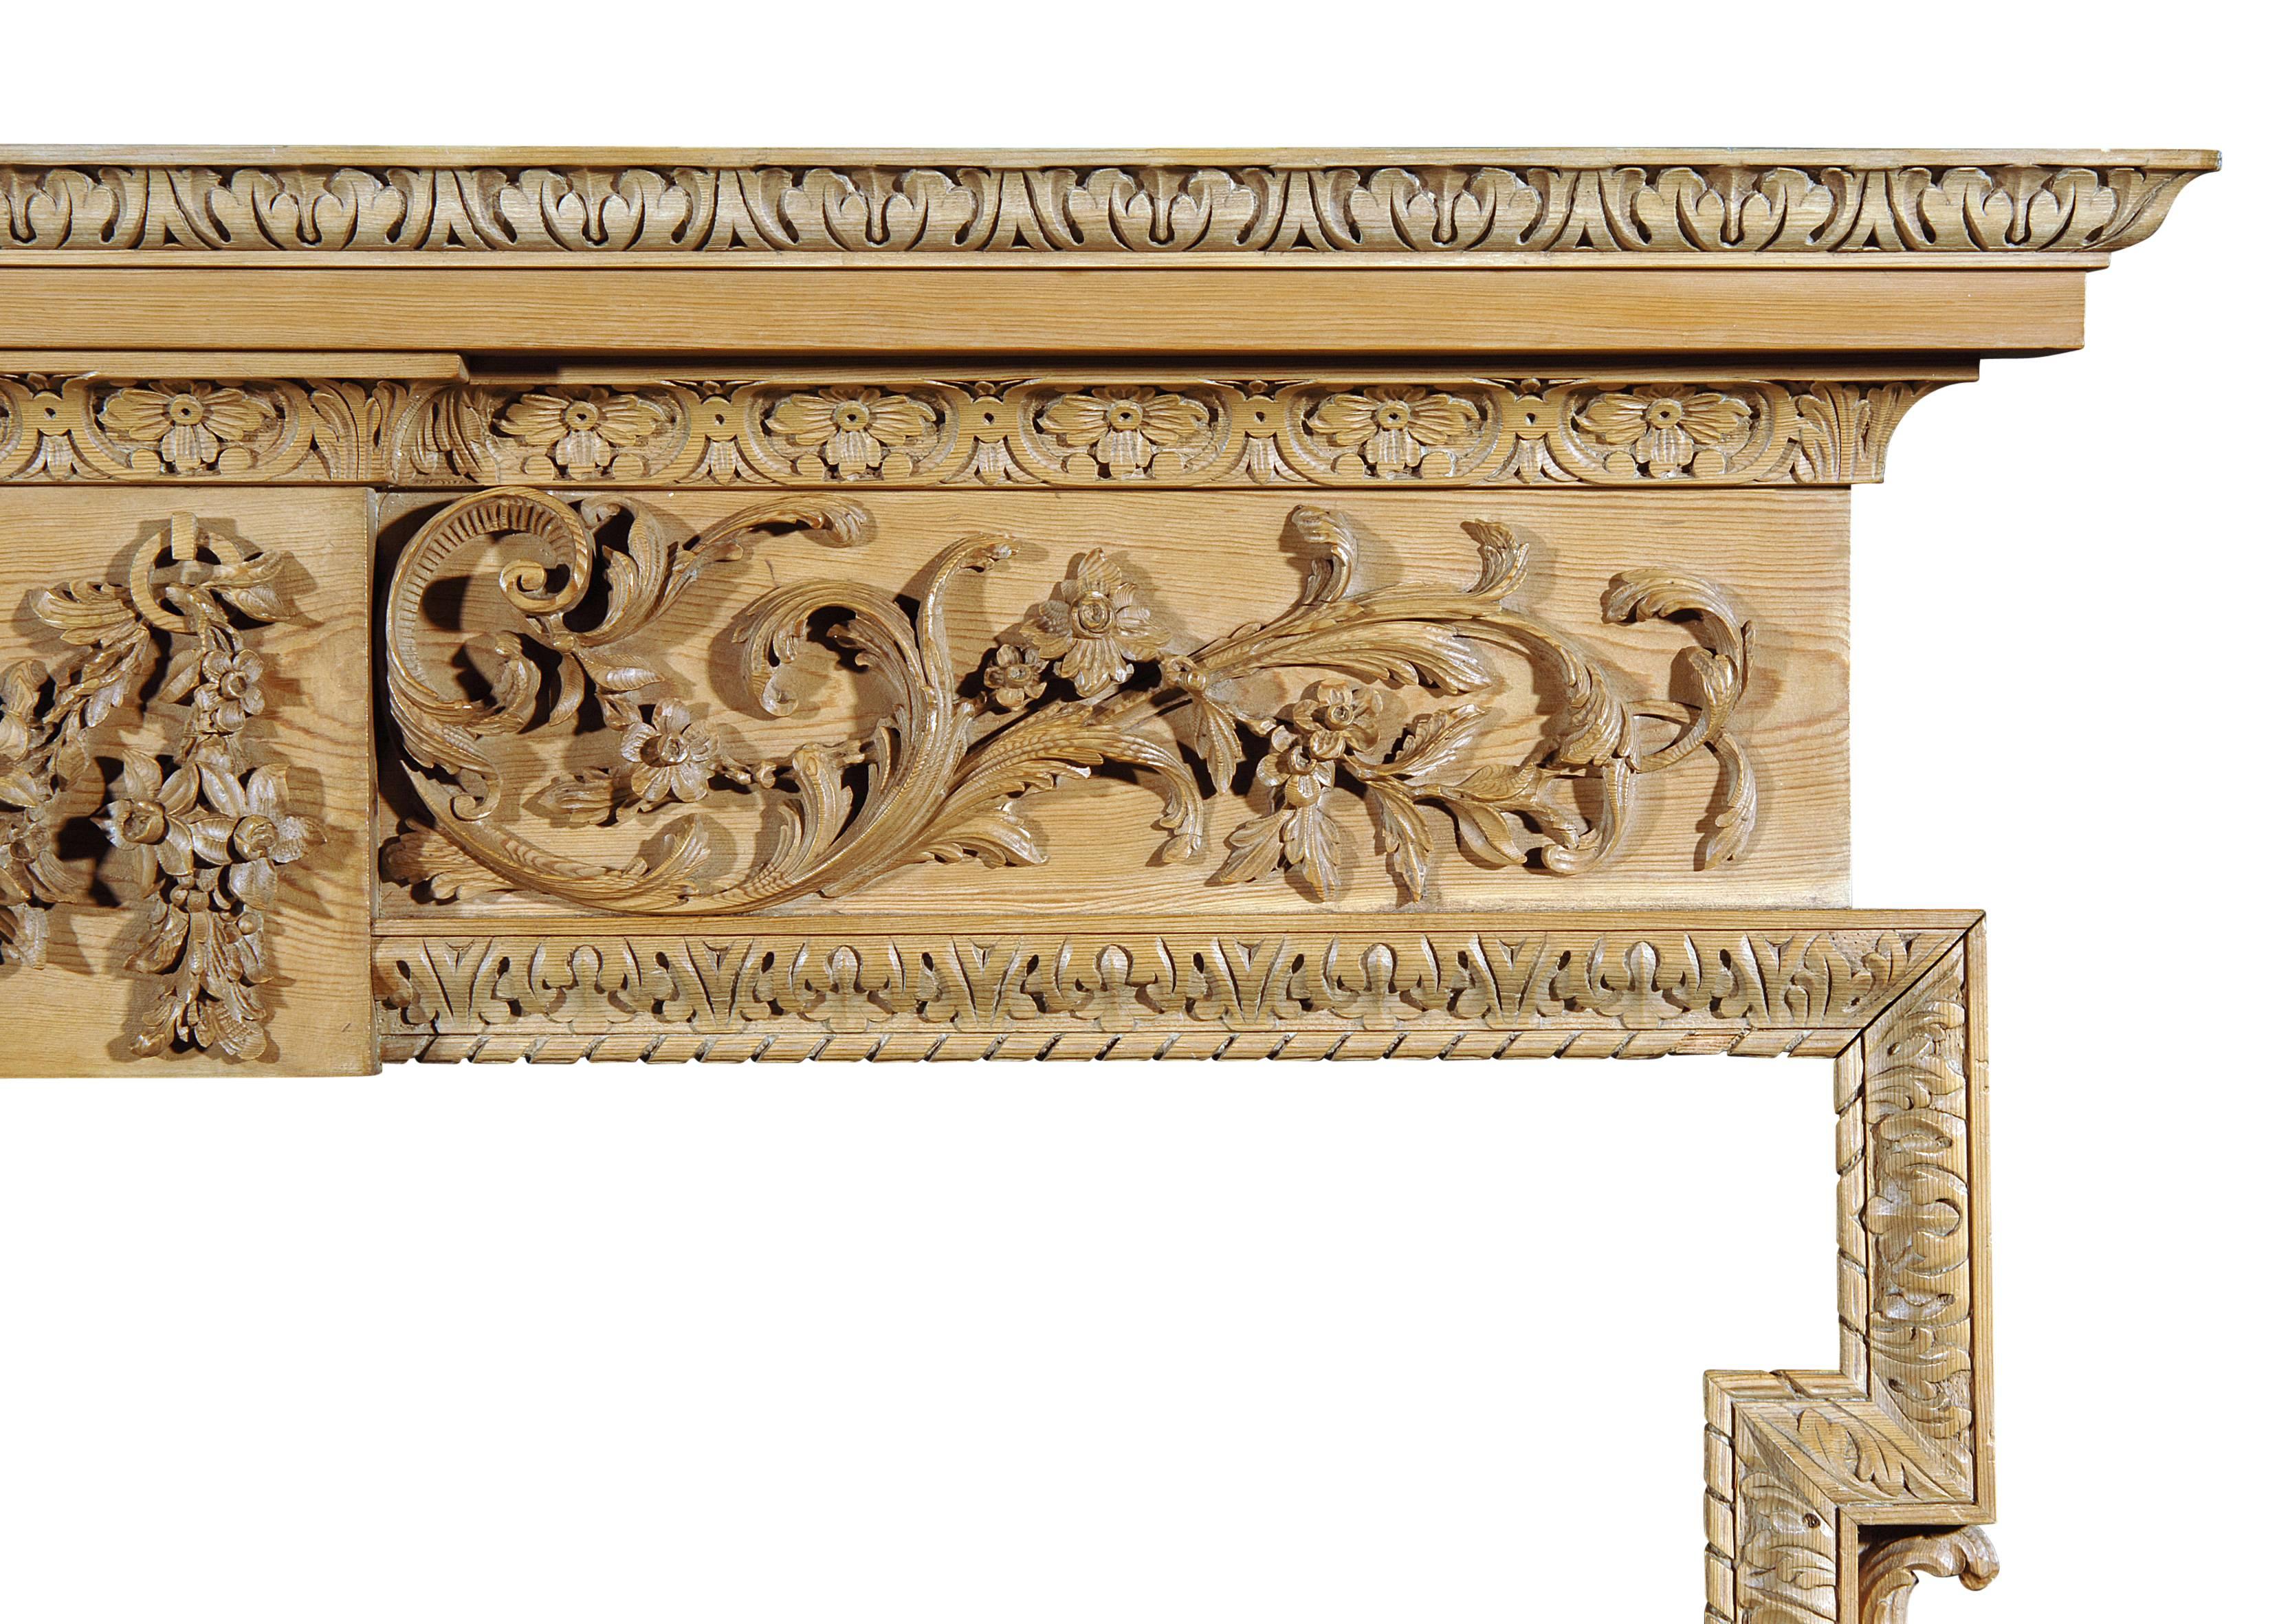 An English George III style pine fireplace, with carved festoon centre of leaves, fruit and flowers, scrolled and leaf side panels, acanthus leaf cornice and leg moulding. Carved scroll and leaf brackets to jambs. Width across plinths is 72.75?.